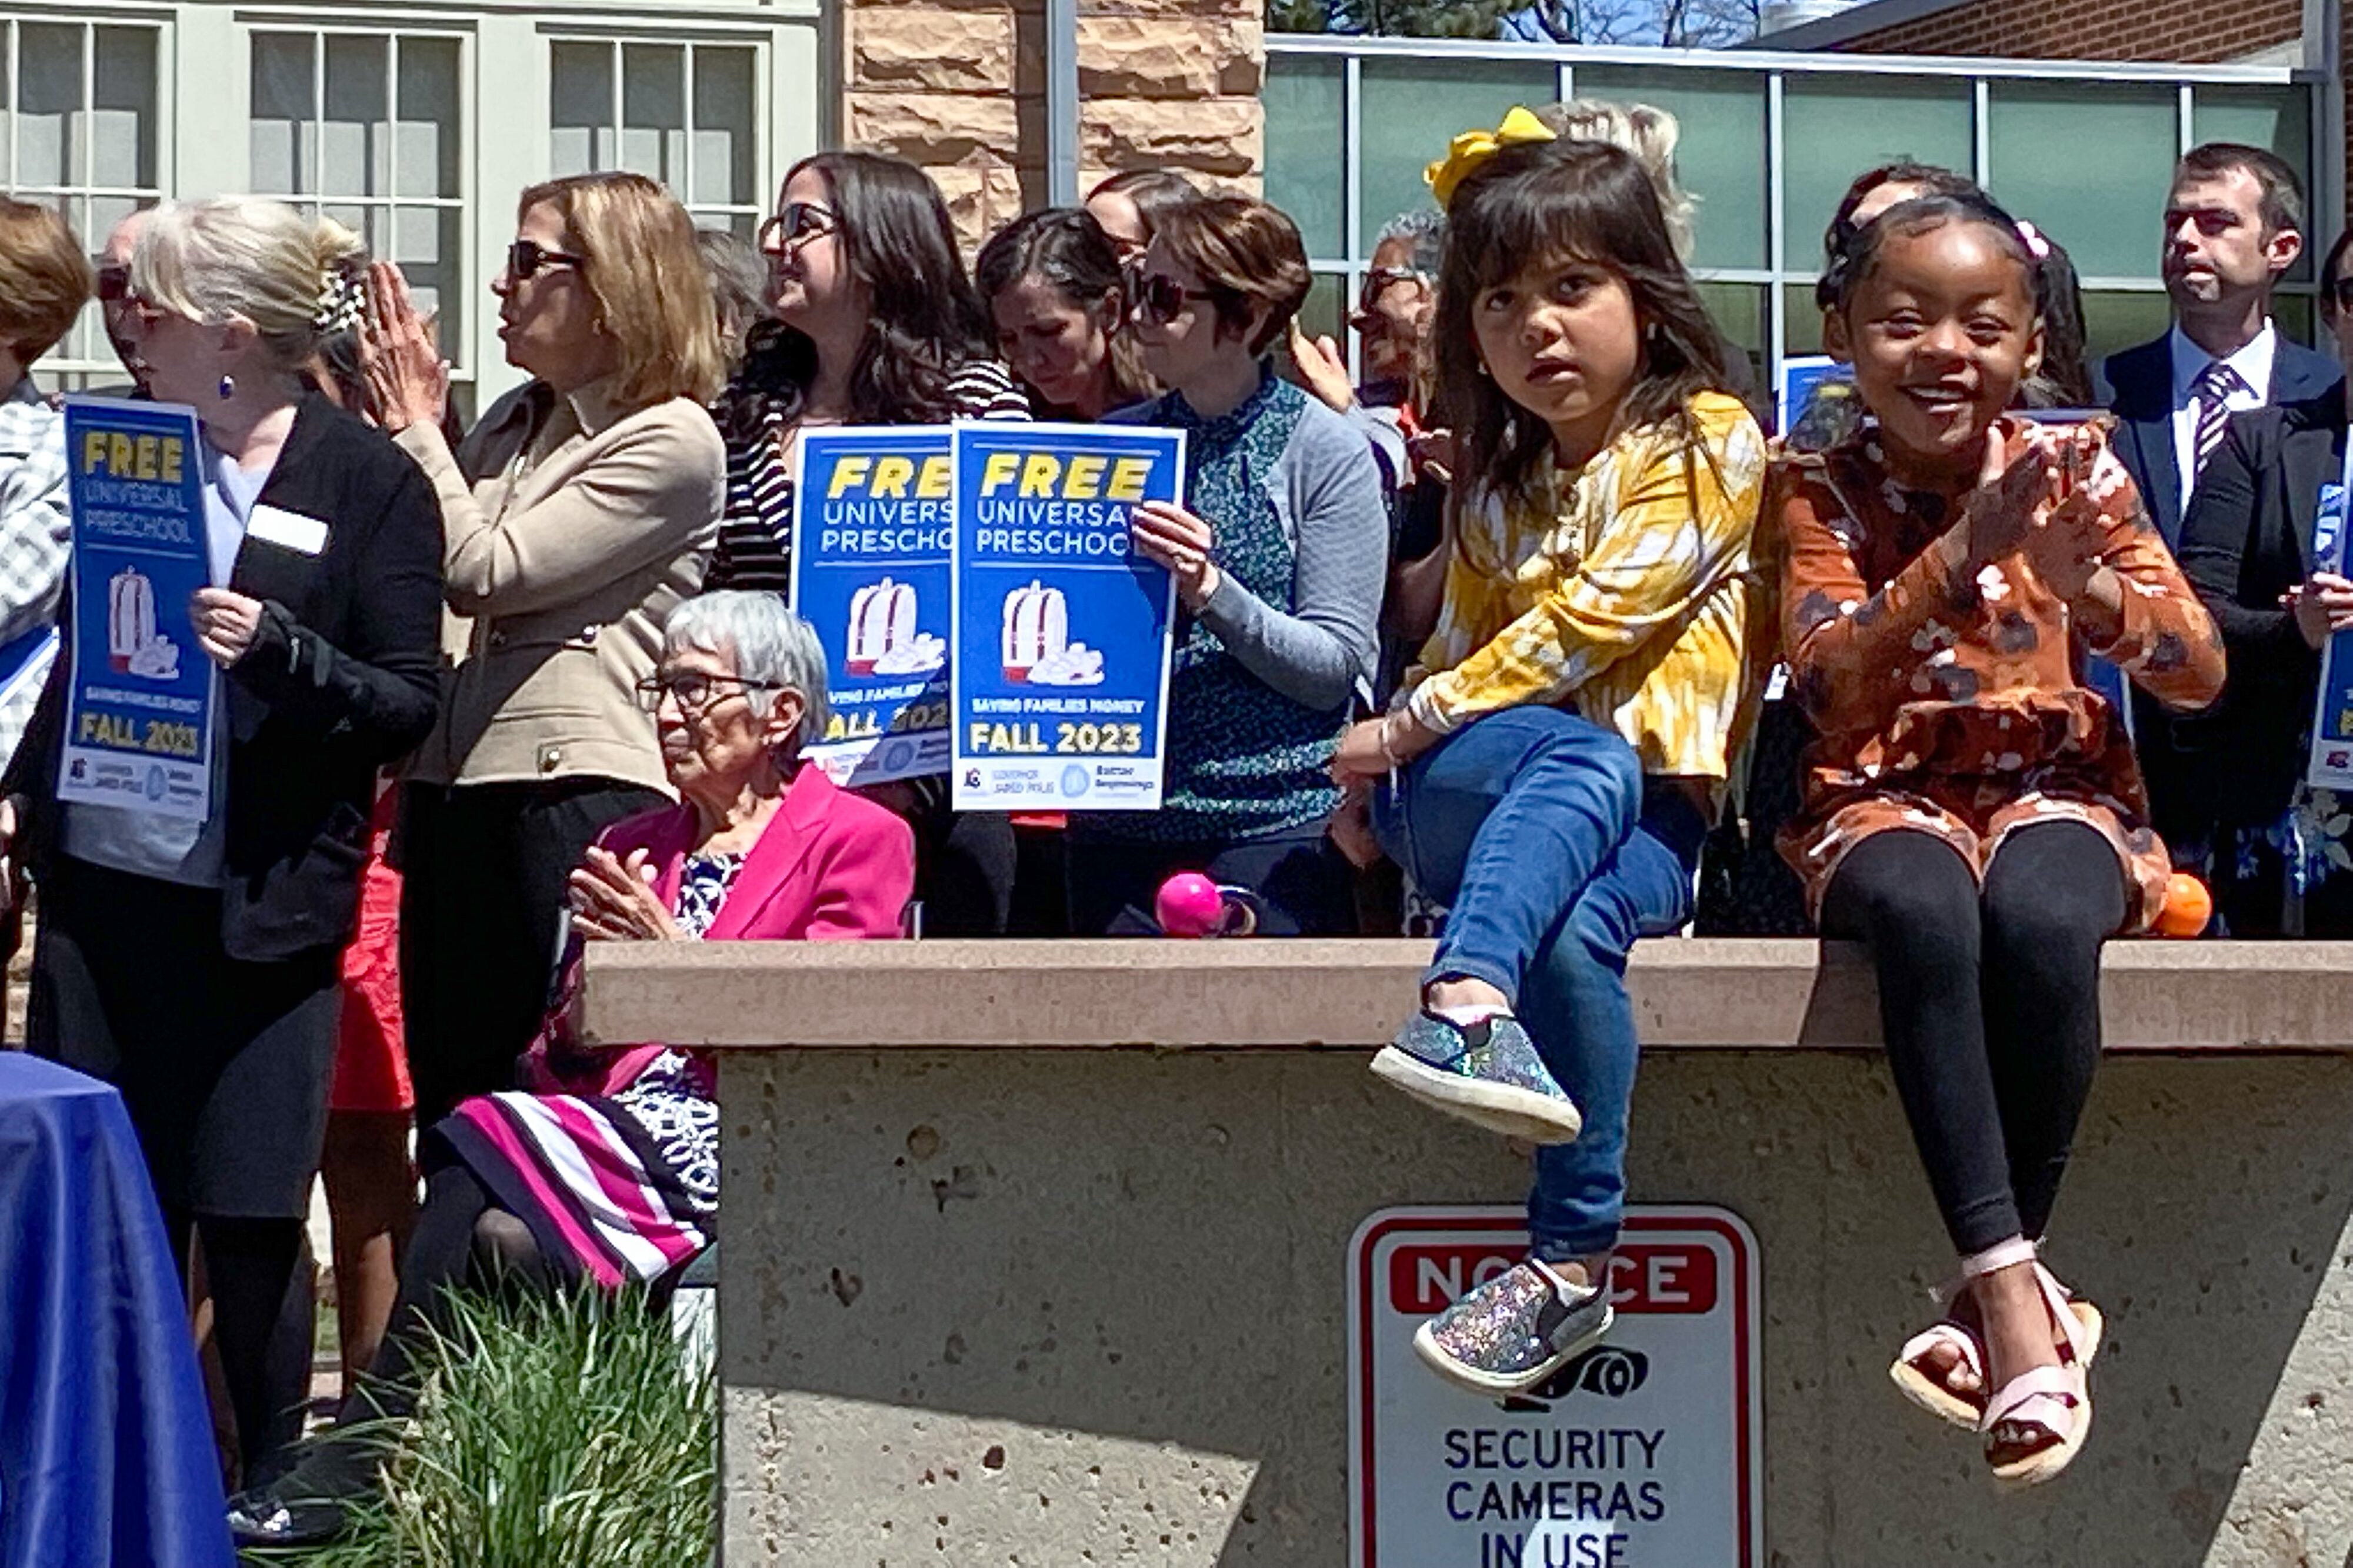 Two little girls sit on a brick wall. One looks distracted and squirmy, while the other claps her hands. A large crowd of adults stands behind them. The adults hold signs that say “Free Universal Preschool.”